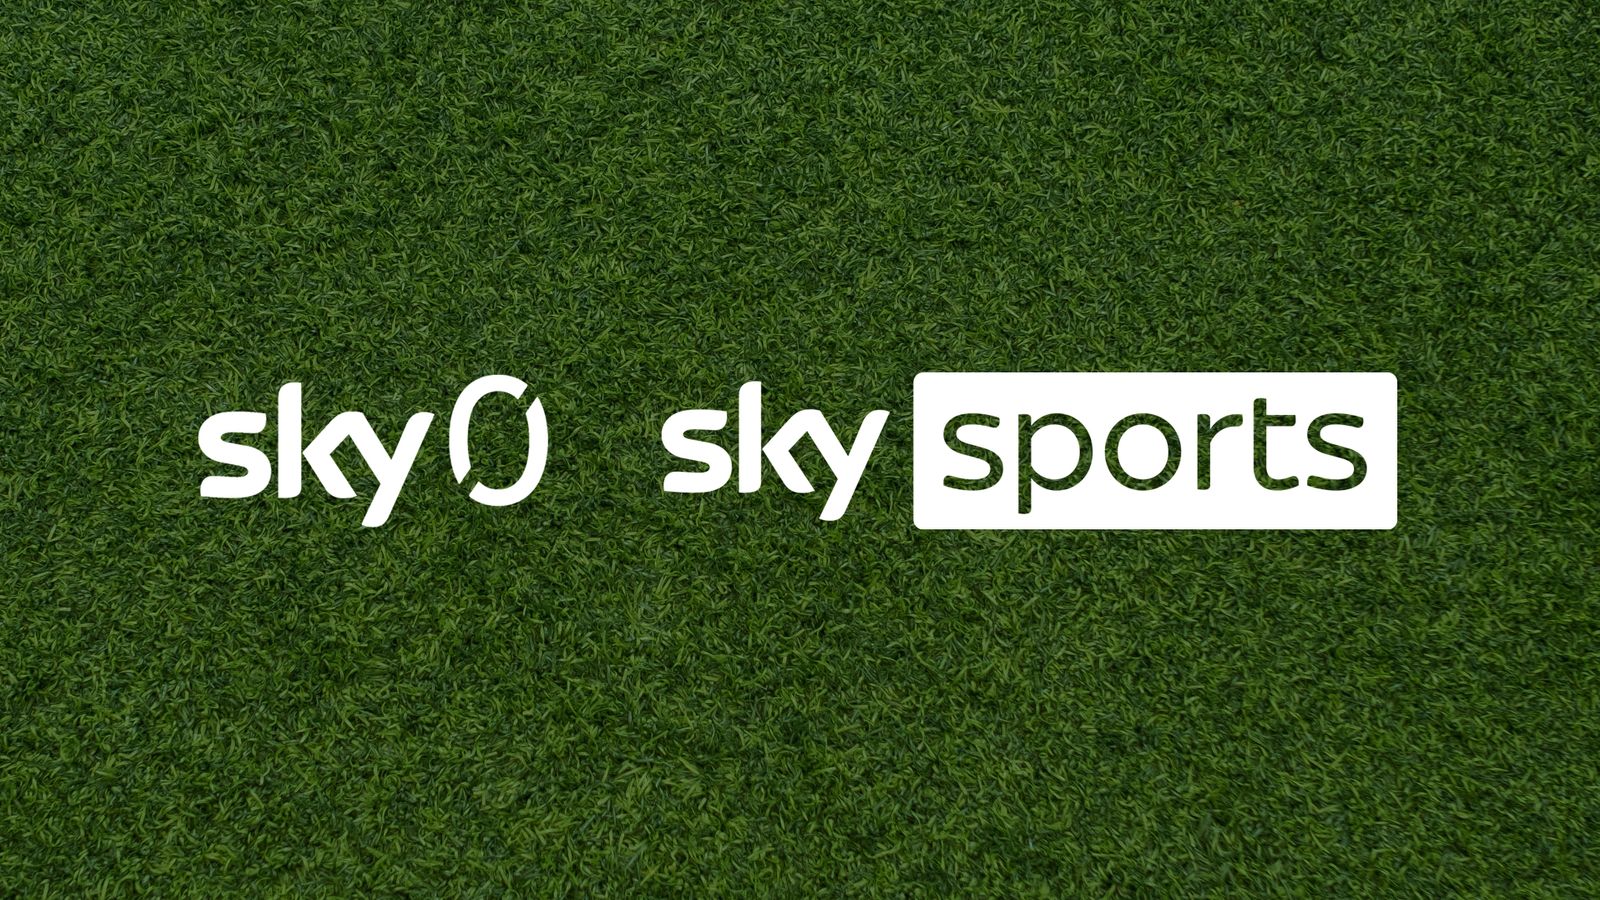 Sky Zero & Sky Sports: Help us look after the sports we love